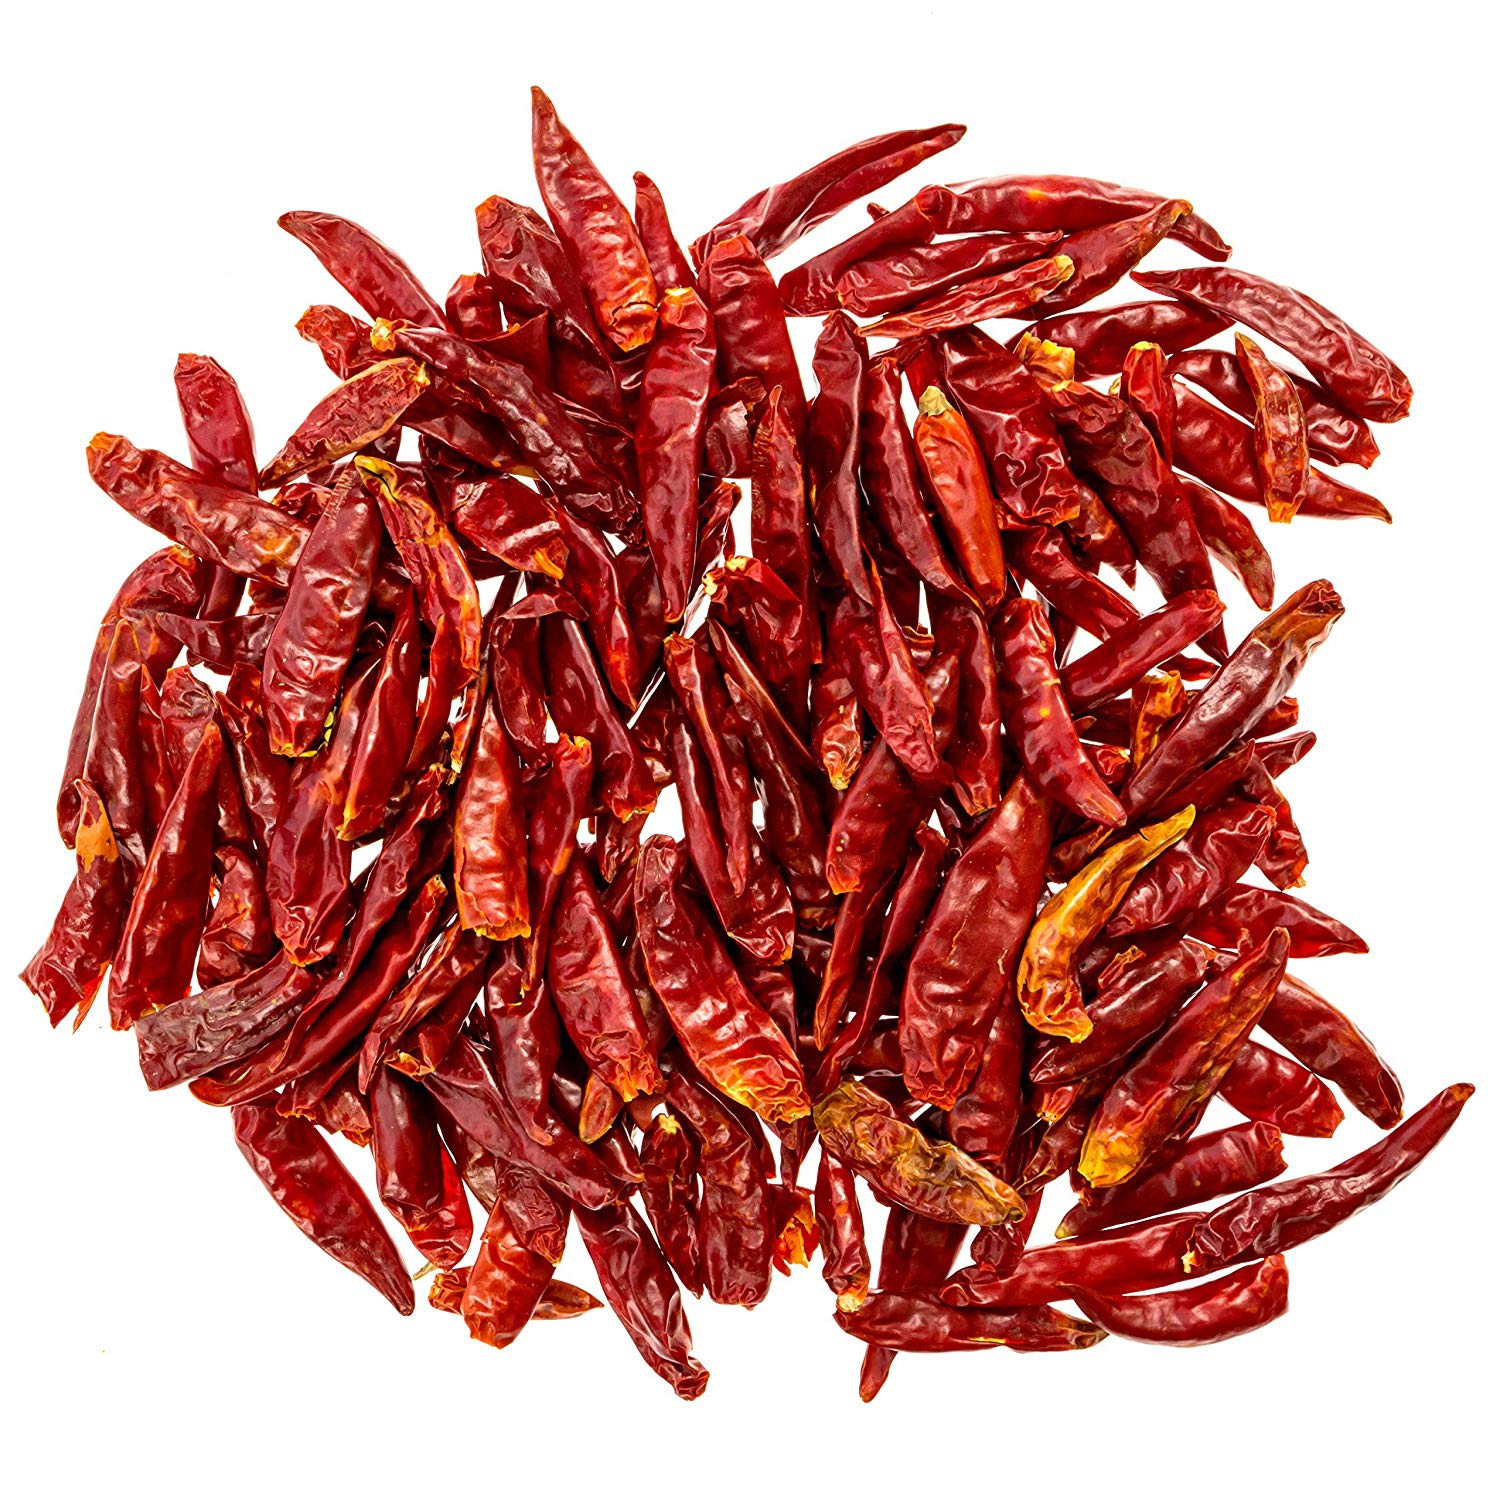 Amazon.com : THREE SQUIRRELS Szechuan Whole Dried Chilies, Chinese ...